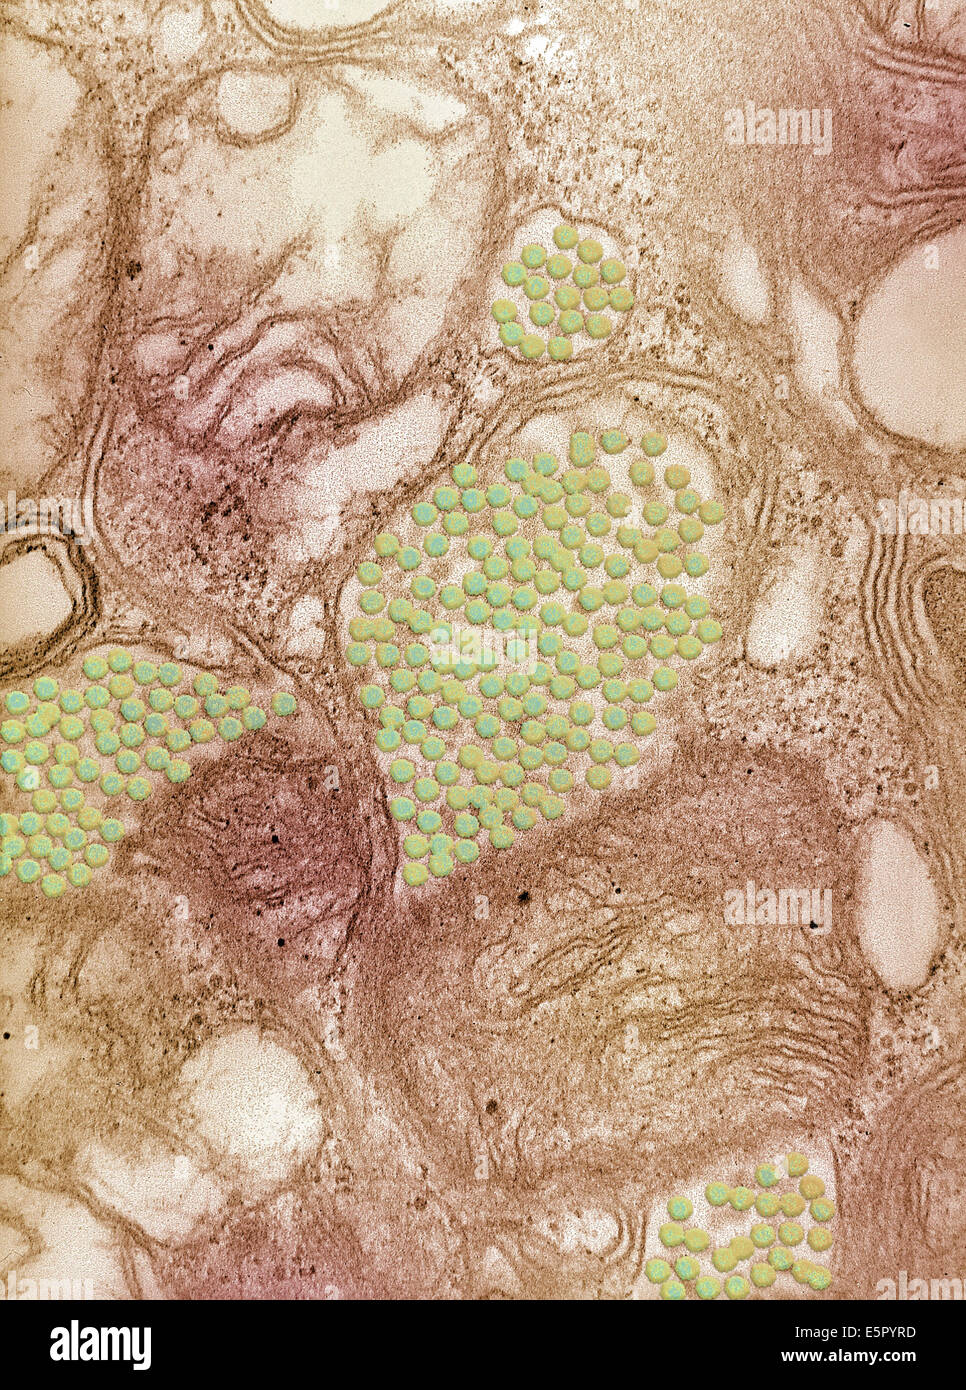 Colorized transmission electron micrograph (TEM) of Eastern equine encephalitis (EEE) viruses from a salivary gland of an Stock Photo